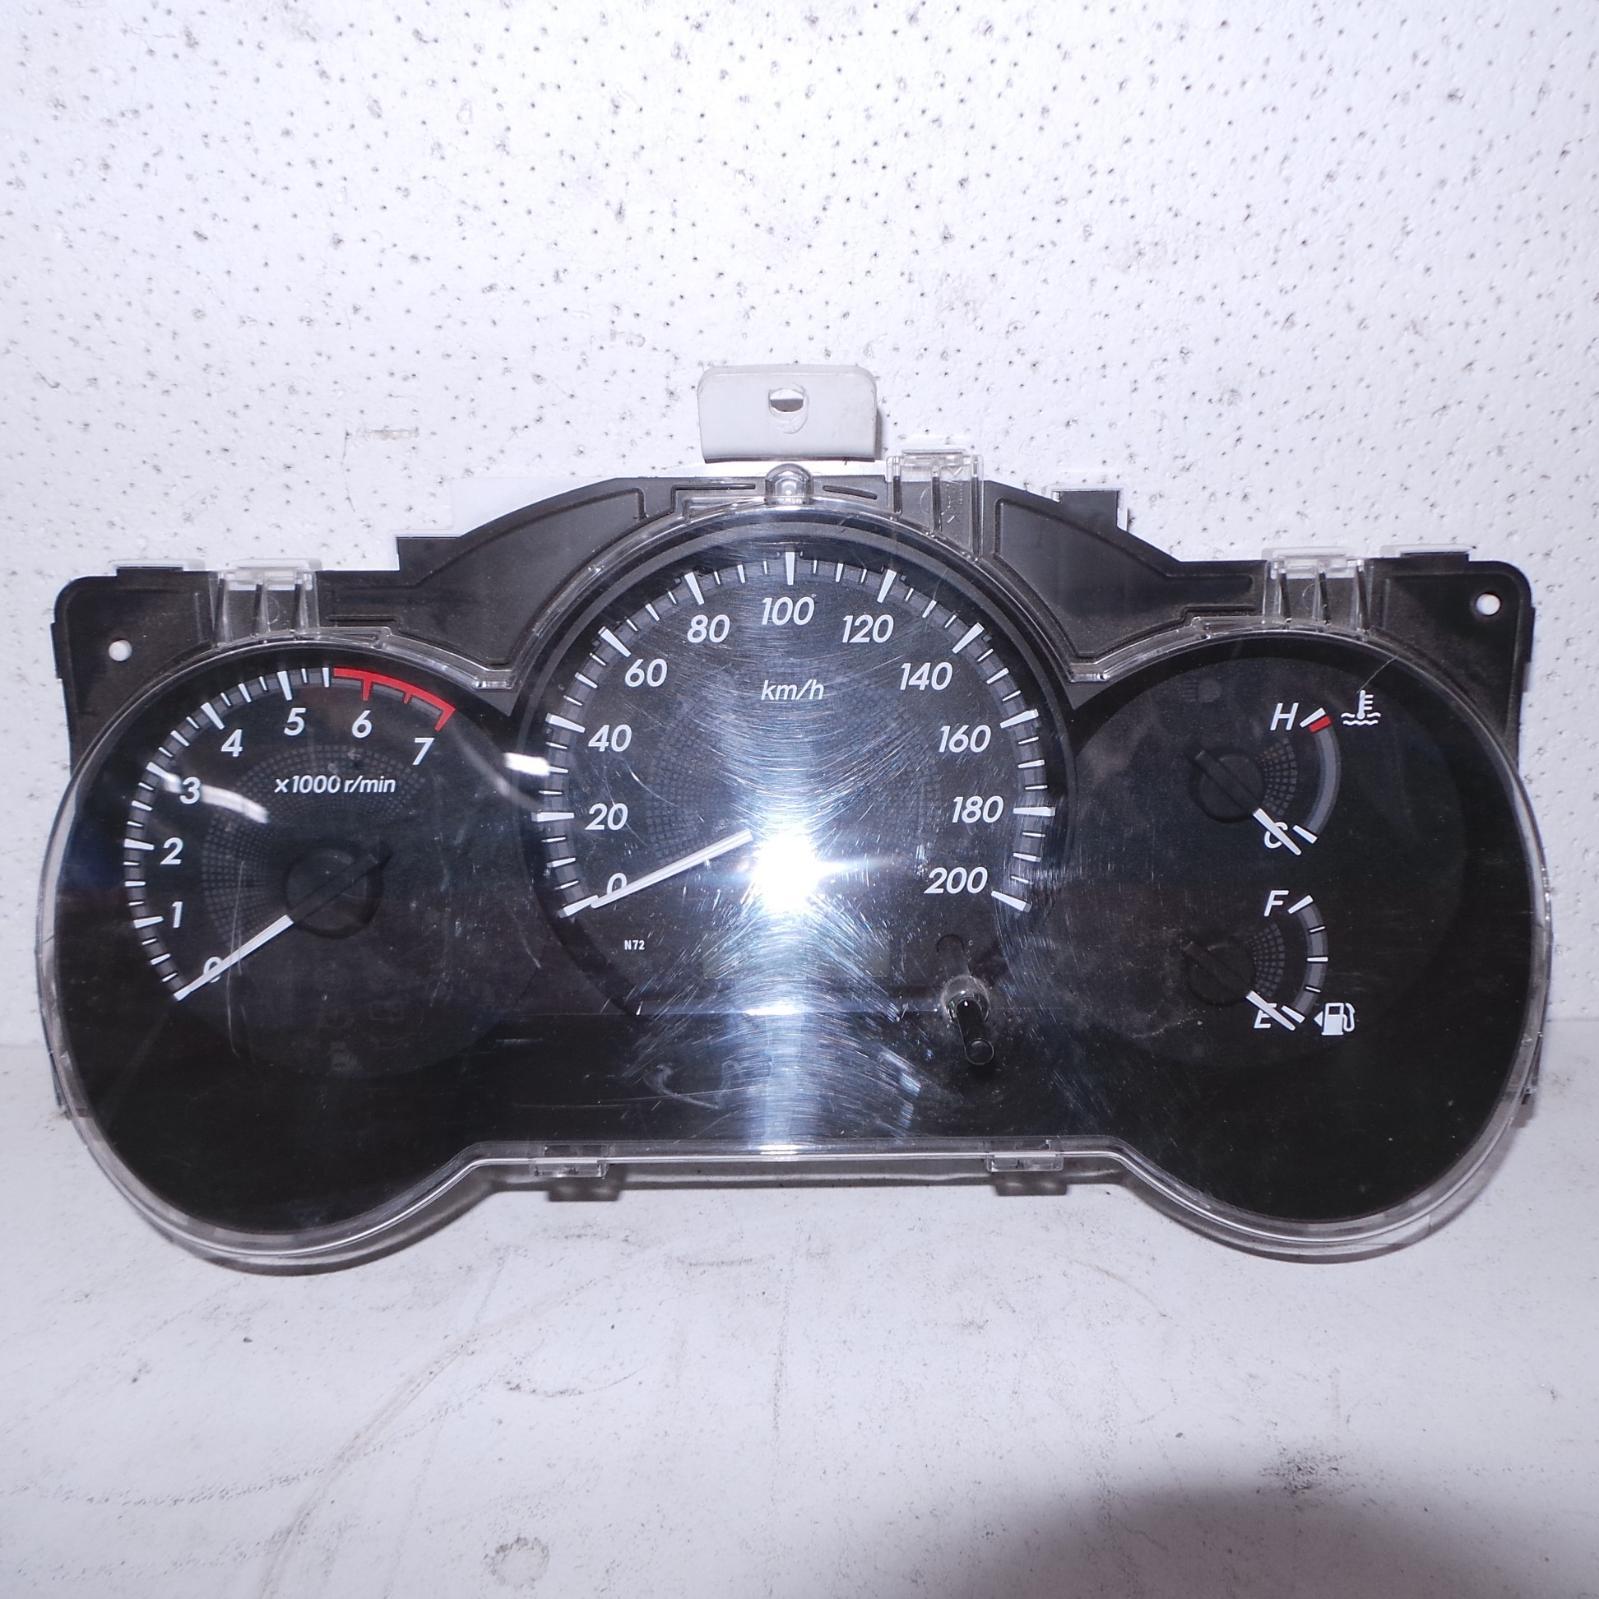 TOYOTA HILUX, Instrument Cluster, PETROL, 2.7, MANUAL T/M, 2WD, WORKMATE, 07/11-08/15